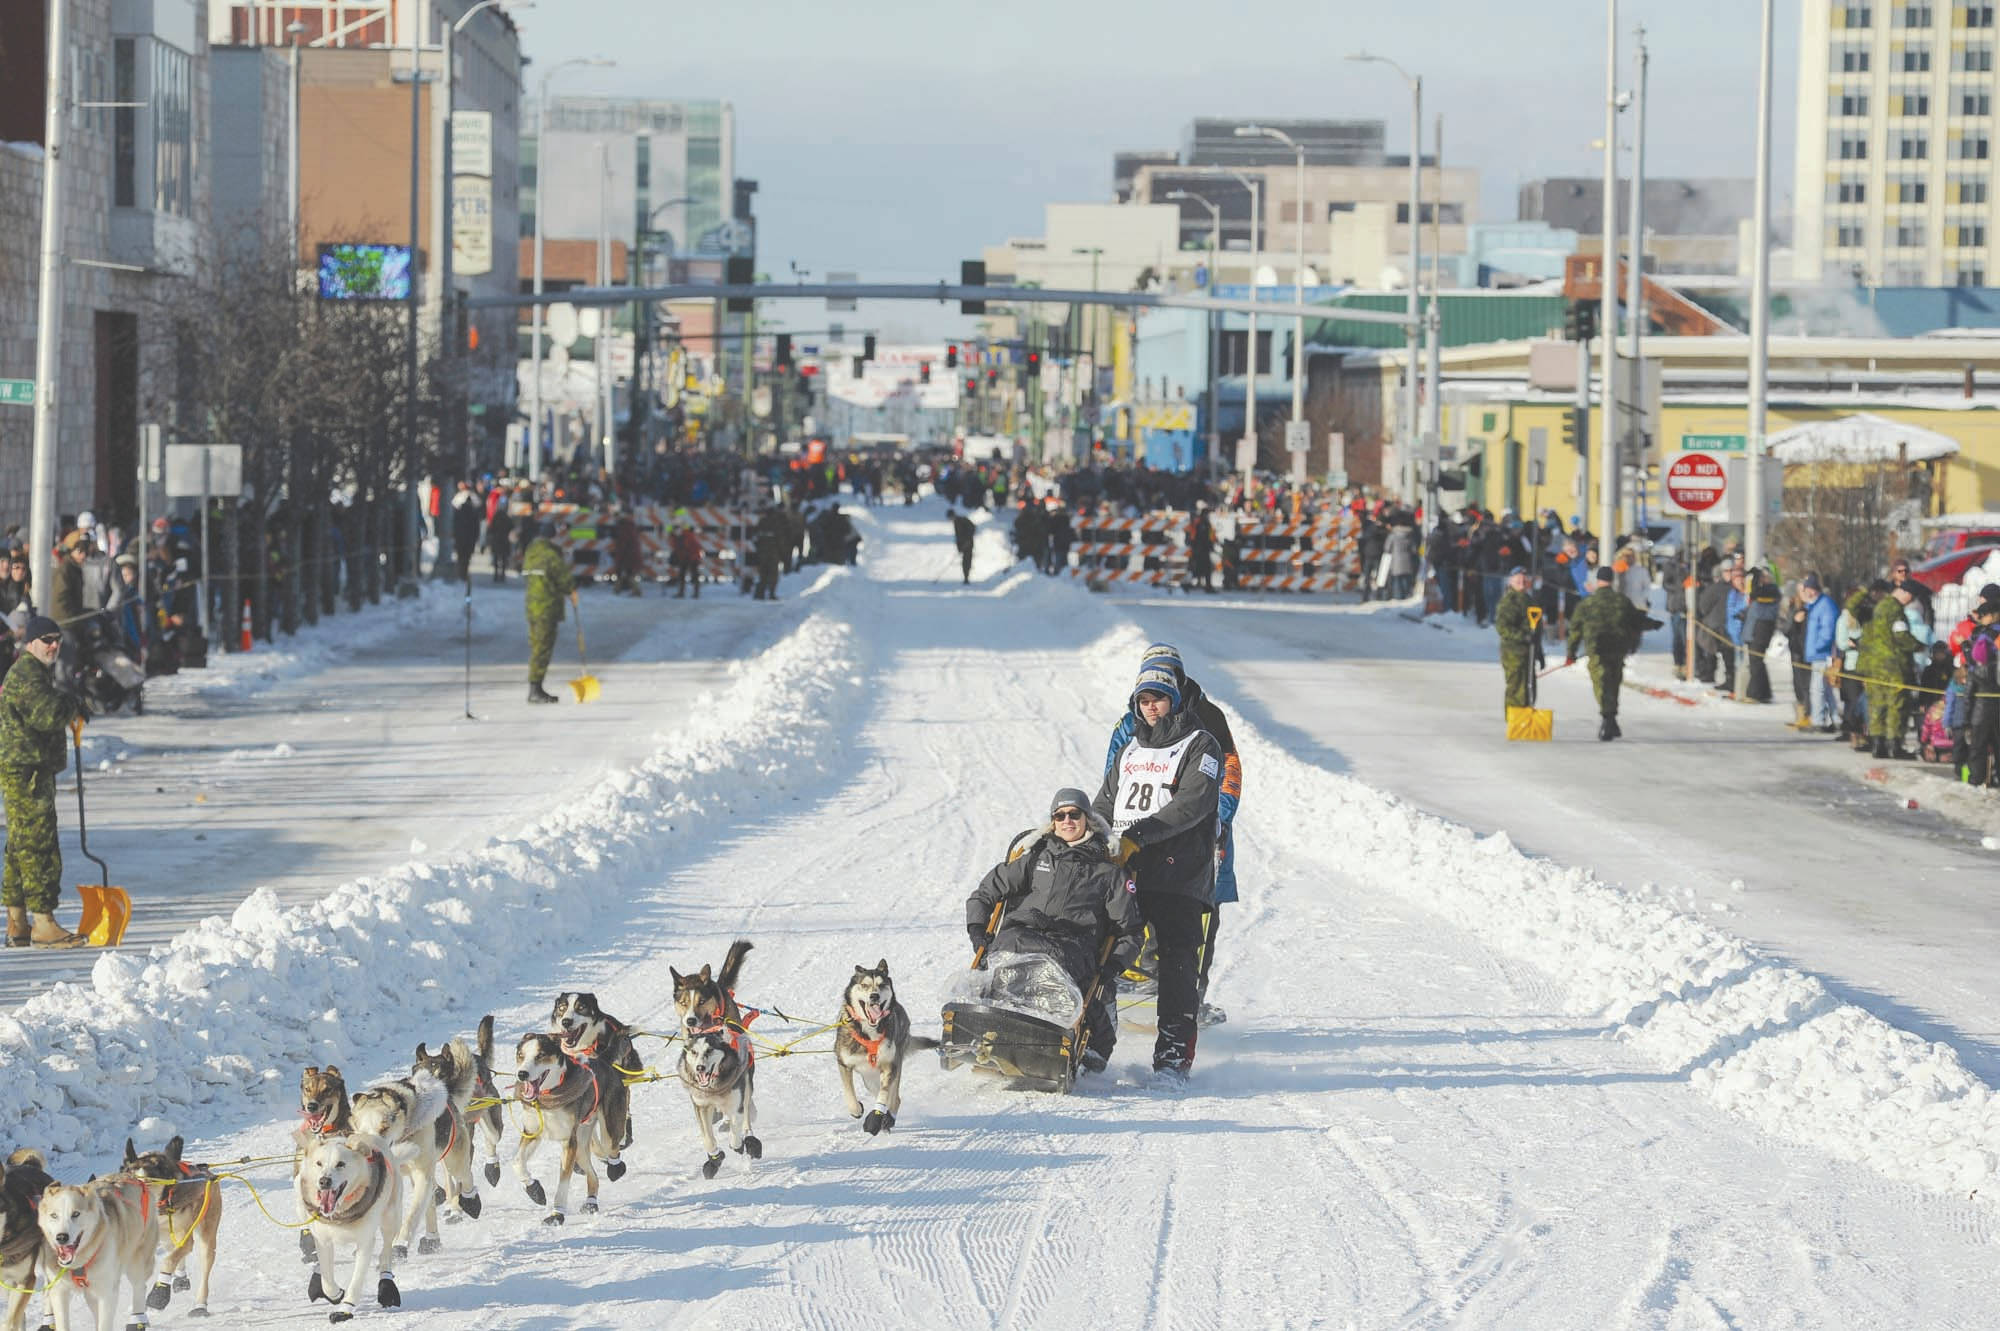 In this March 2, 2019, file photo, defending champion Joar Lefseth Ulsom runs his team down Fourth Ave during the ceremonial start of the Iditarod Trail Sled Dog Race in Anchorage, Alaska. Alaska Airlines announced Monday, March 2, 2020, it will drop its sponsorship of the Iditarod, Alaska’s most famous sporting event. The airline in a statement said the decision was made as it transitions to a new corporate giving strategy, but People for the Ethical Treatment of Animals, the most vocal critic of the thousand-mile sled dog race across Alaska, immediately took credit. (AP Photo/Michael Dinneen, File)